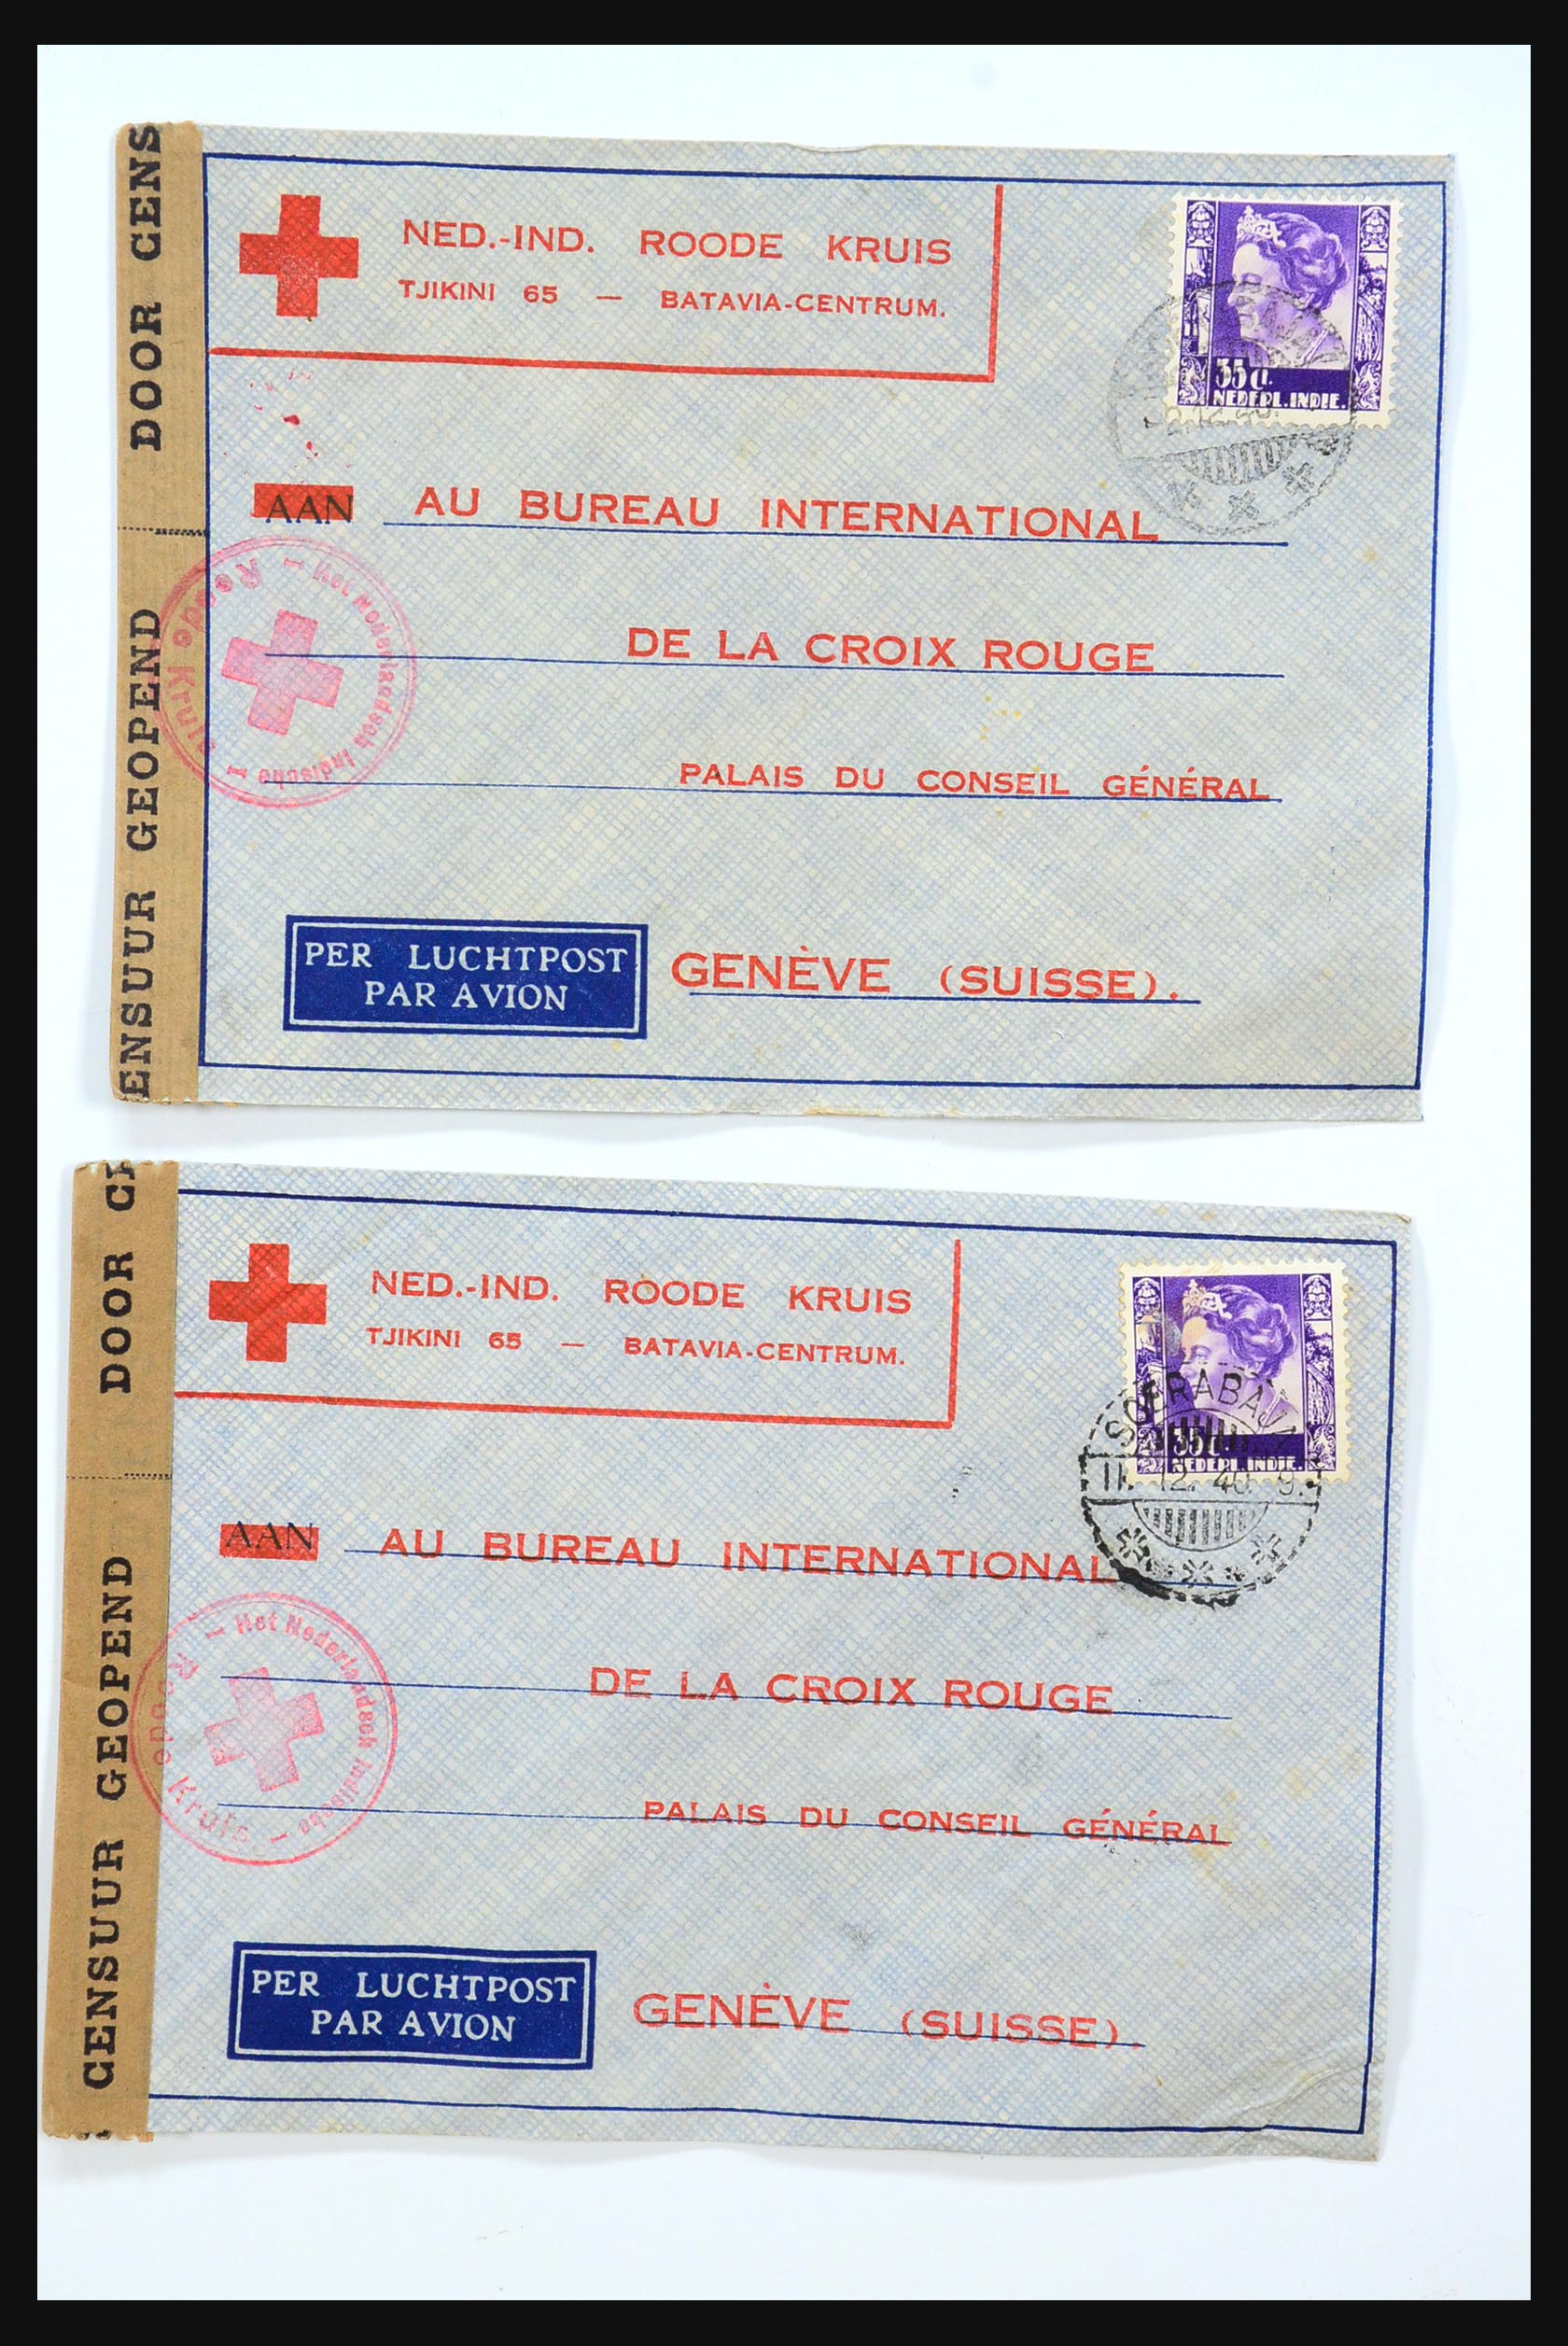 31362 085 - 31362 Netherlands Indies Japanese occupation covers 1942-1945.